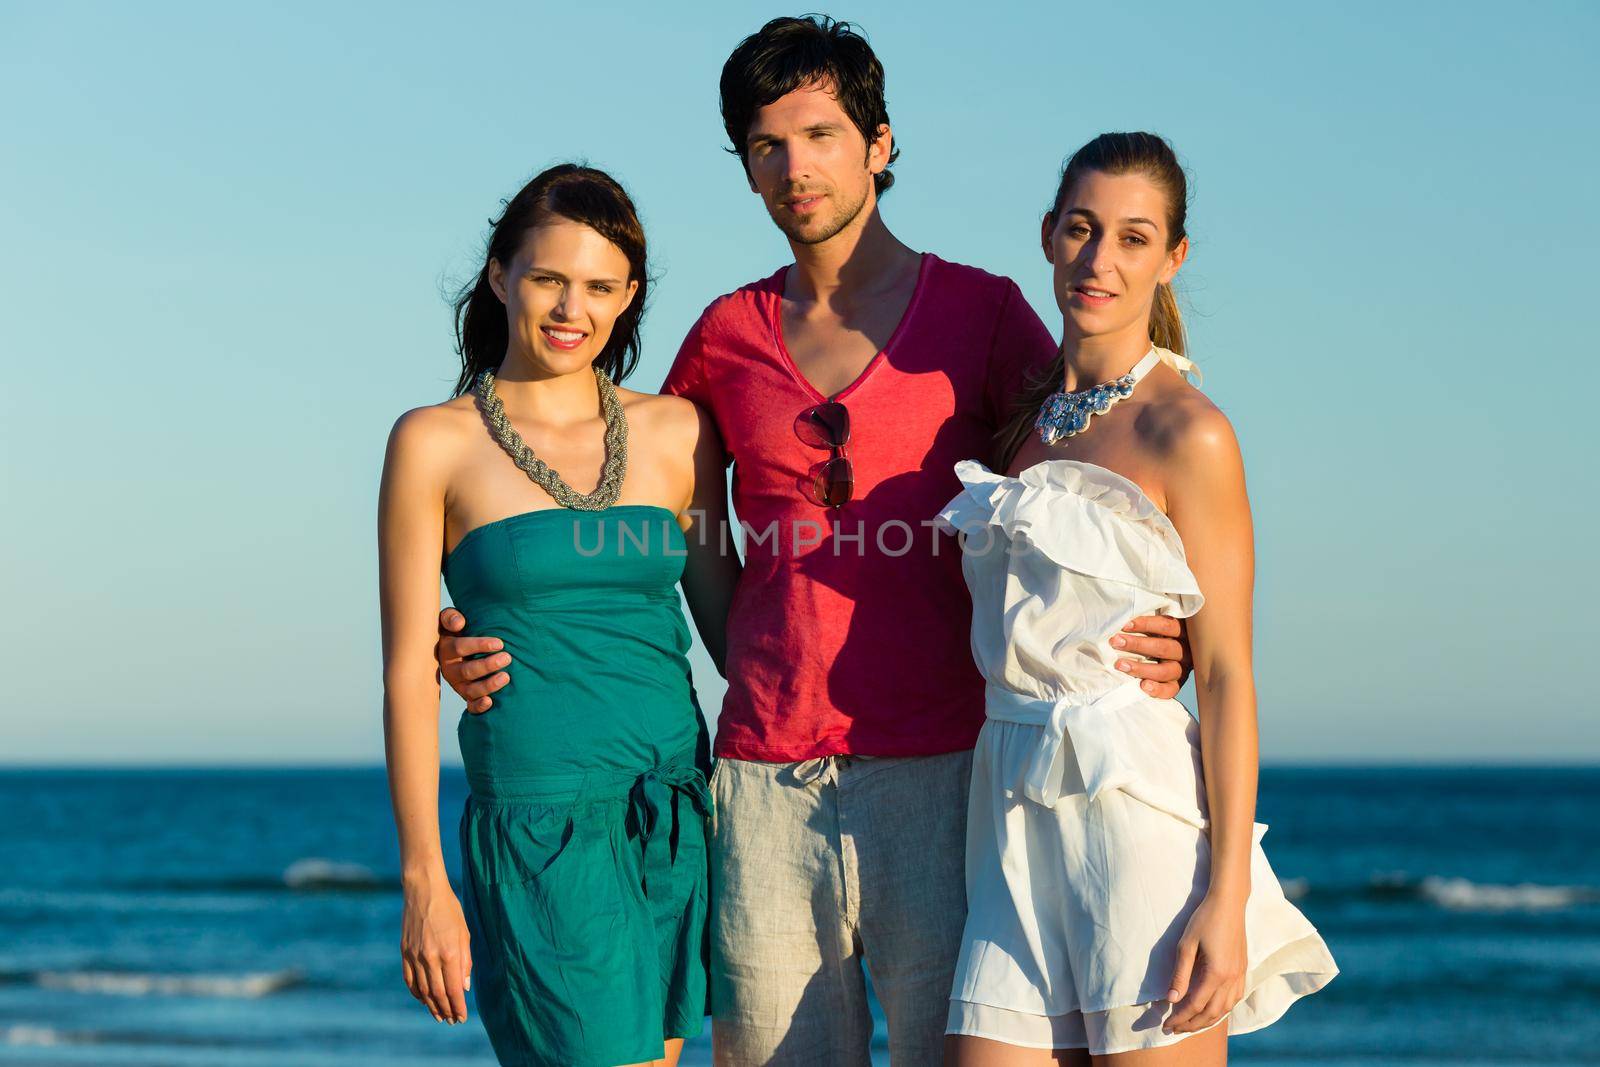 Man and two women enjoy the romantic sunset